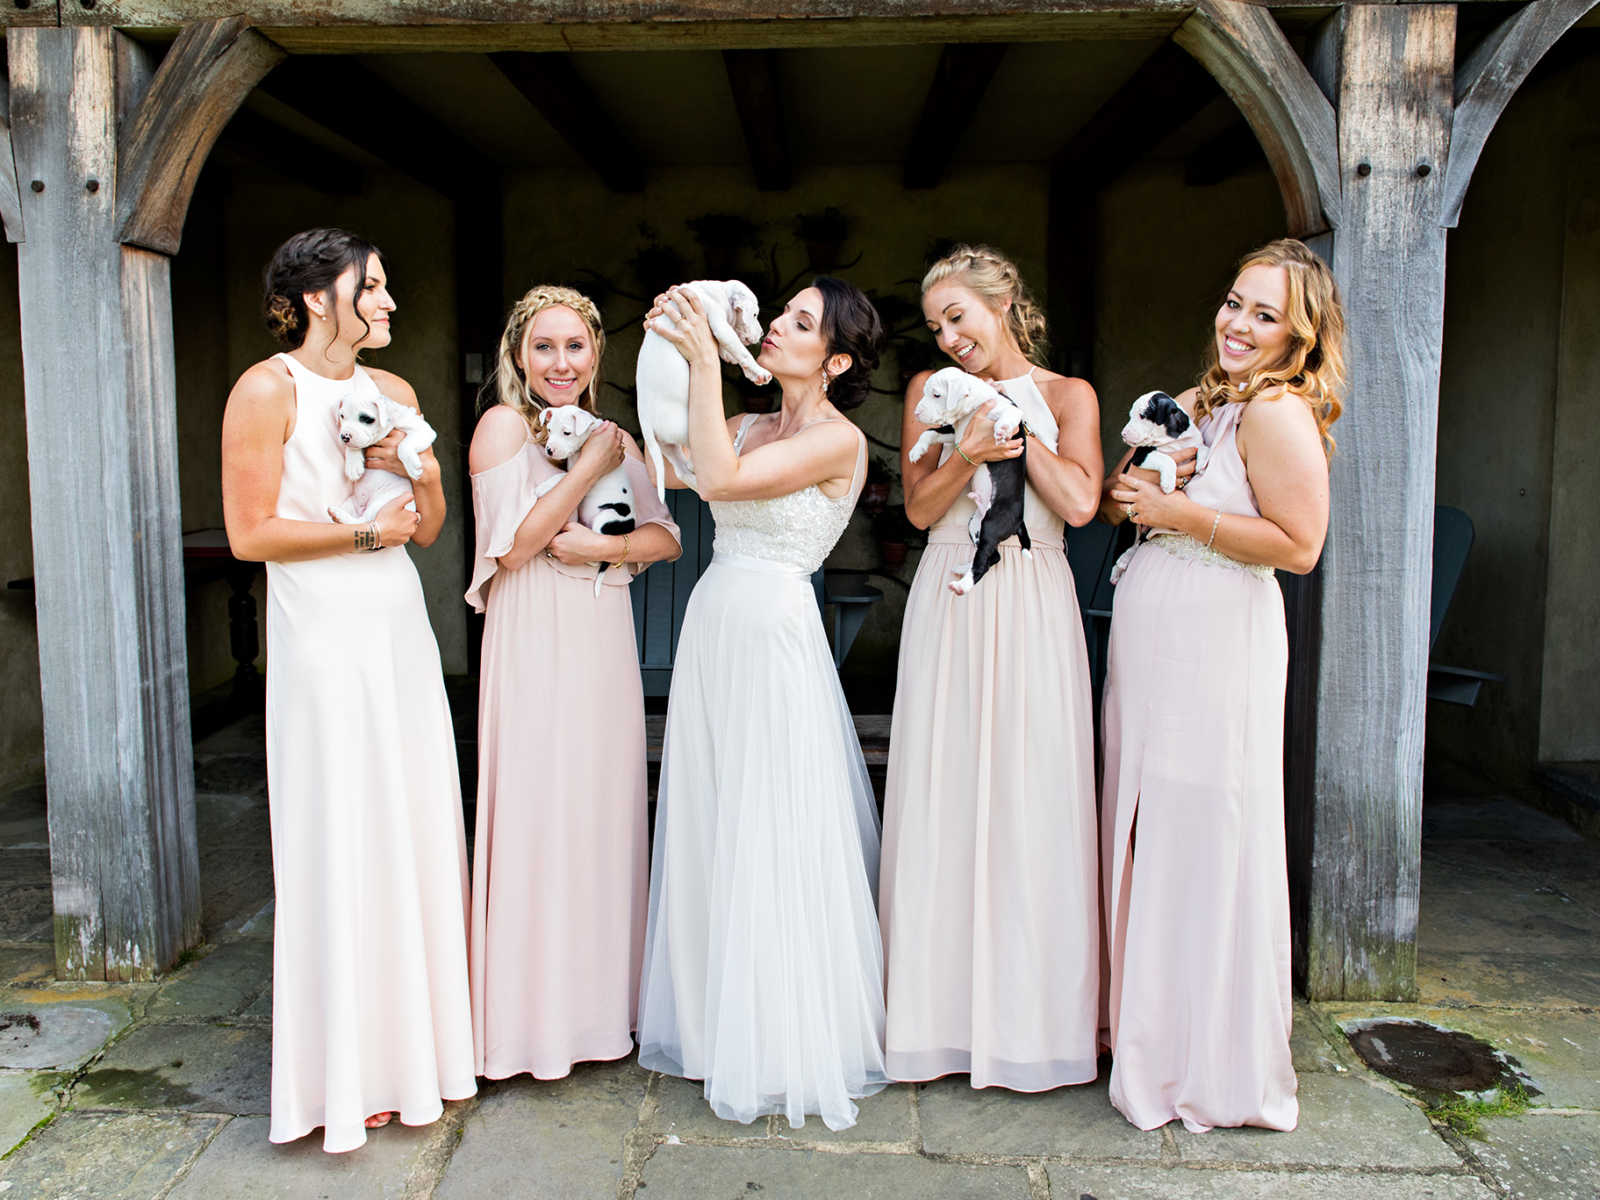 Bride and bridesmaids stand side by side all holding rescue puppies